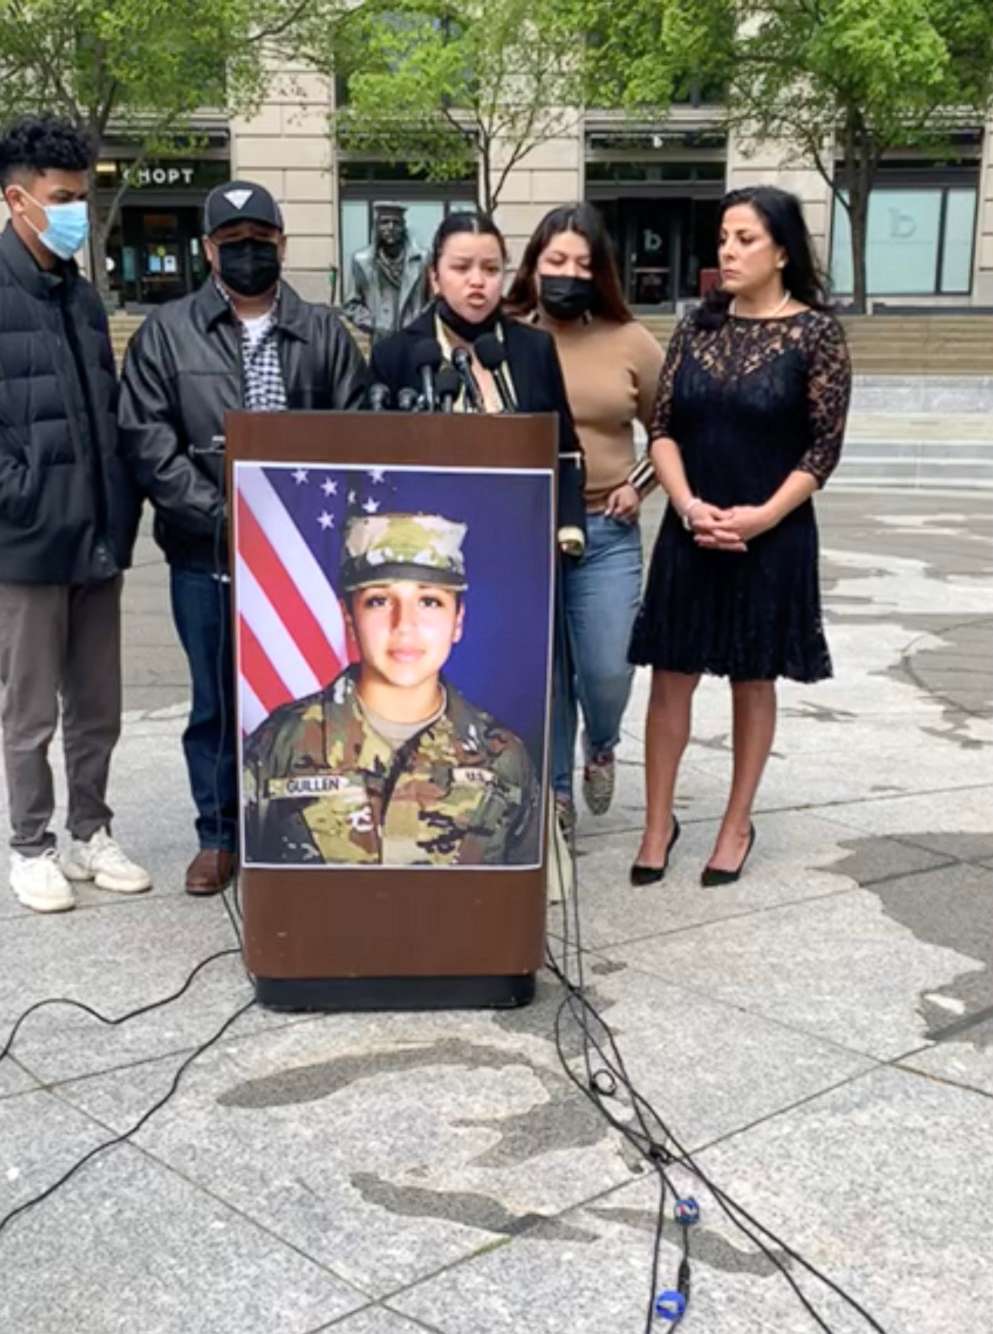 PHOTO: Attorney Natalie Khawam, left, at a press conference in Washington D.C., April 22, 2021, along with Vanessa Guillen's sisters Mayra and Lupe to demand justice in her death.